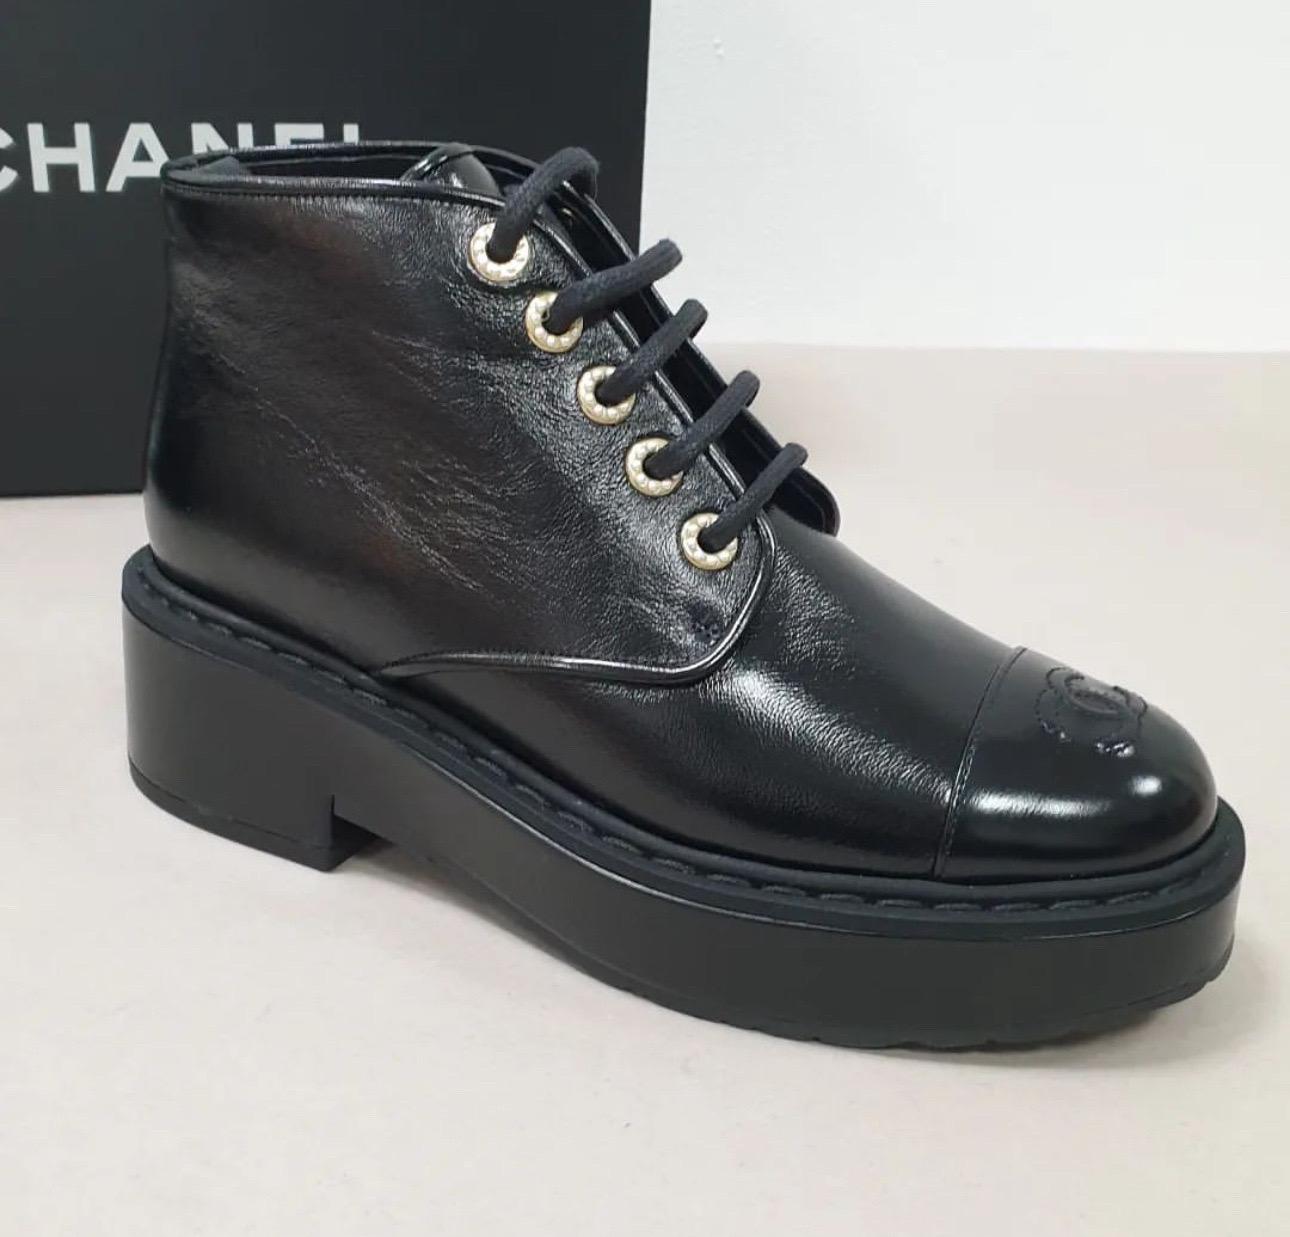 These stylish lace up boots are crafted of crumpled shiny black calfskin leather. 
They feature rounded black, smooth leather cap toes, a 1.75-inch heel, and shoelace grommets accented with resin pearls.
Sz.39.5
New. Never worn
Come with dust bag